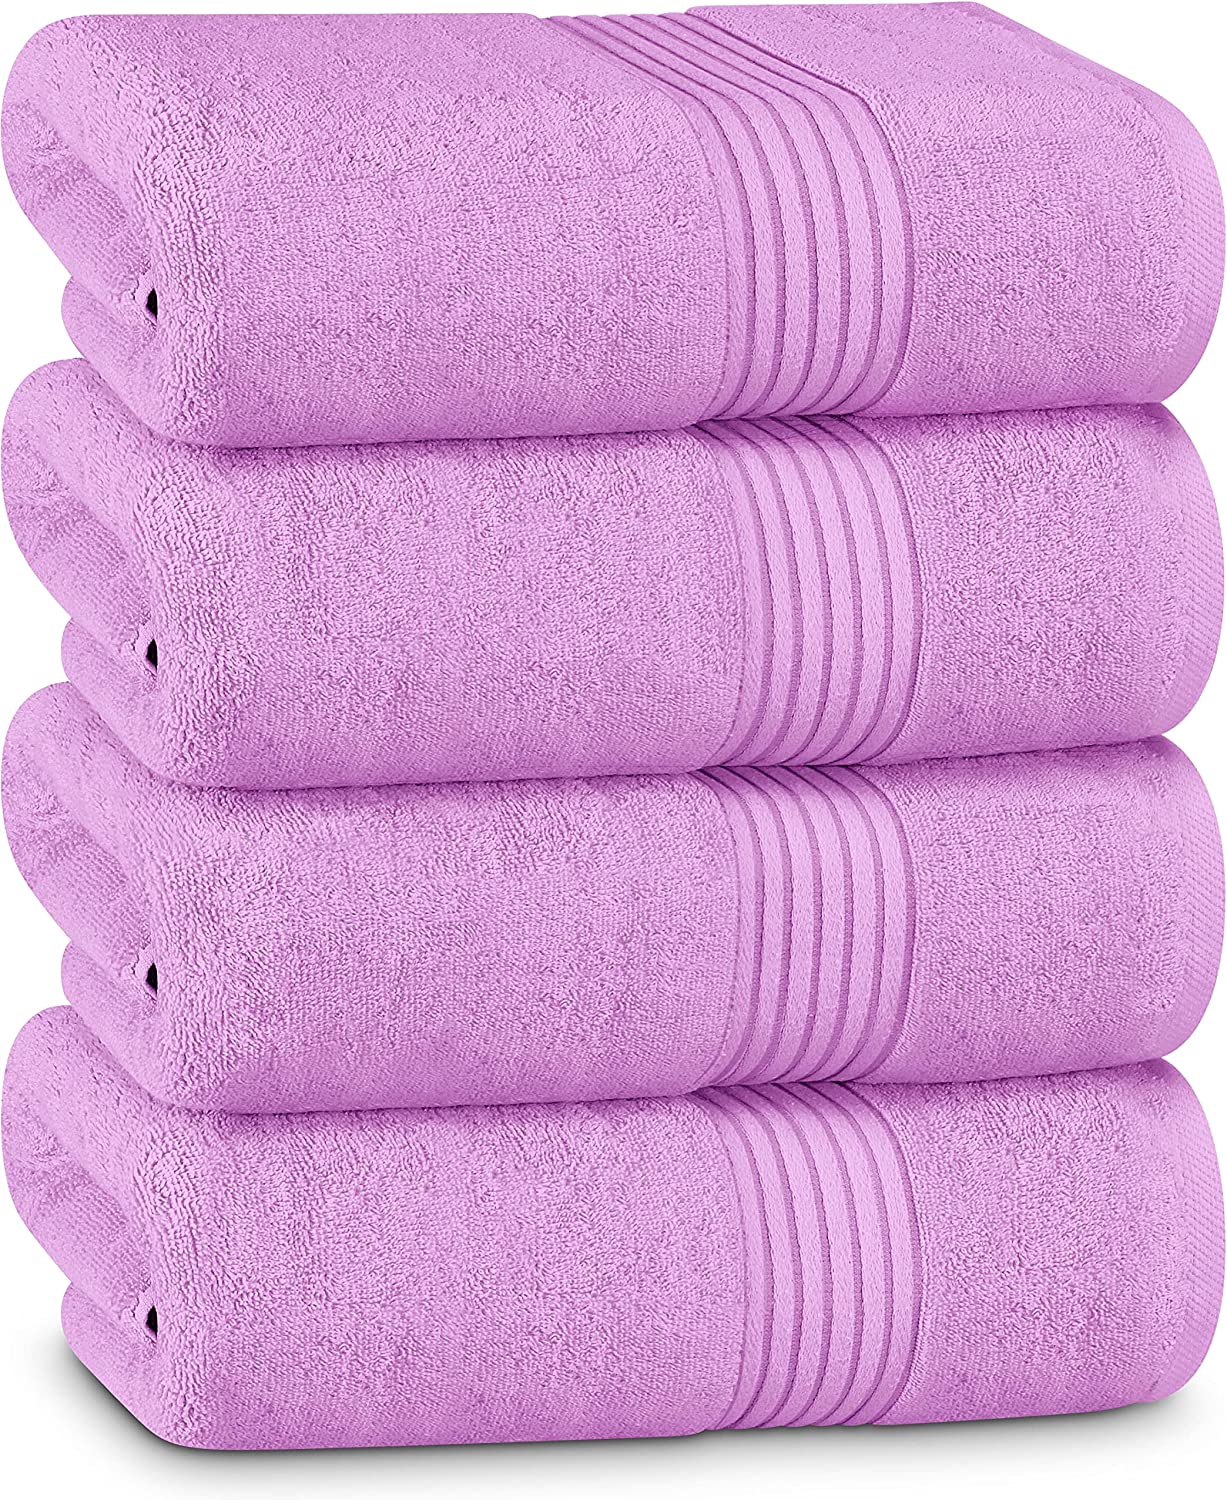 Utopia Towels 4 Piece Hand Towels Set, (16 x 28 inches) 100% Ring Spun  cotton, Lightweight and Highly Absorbent Towels for Bathroom, camp, Travel,  Spa, and Hotel (Sage green) 